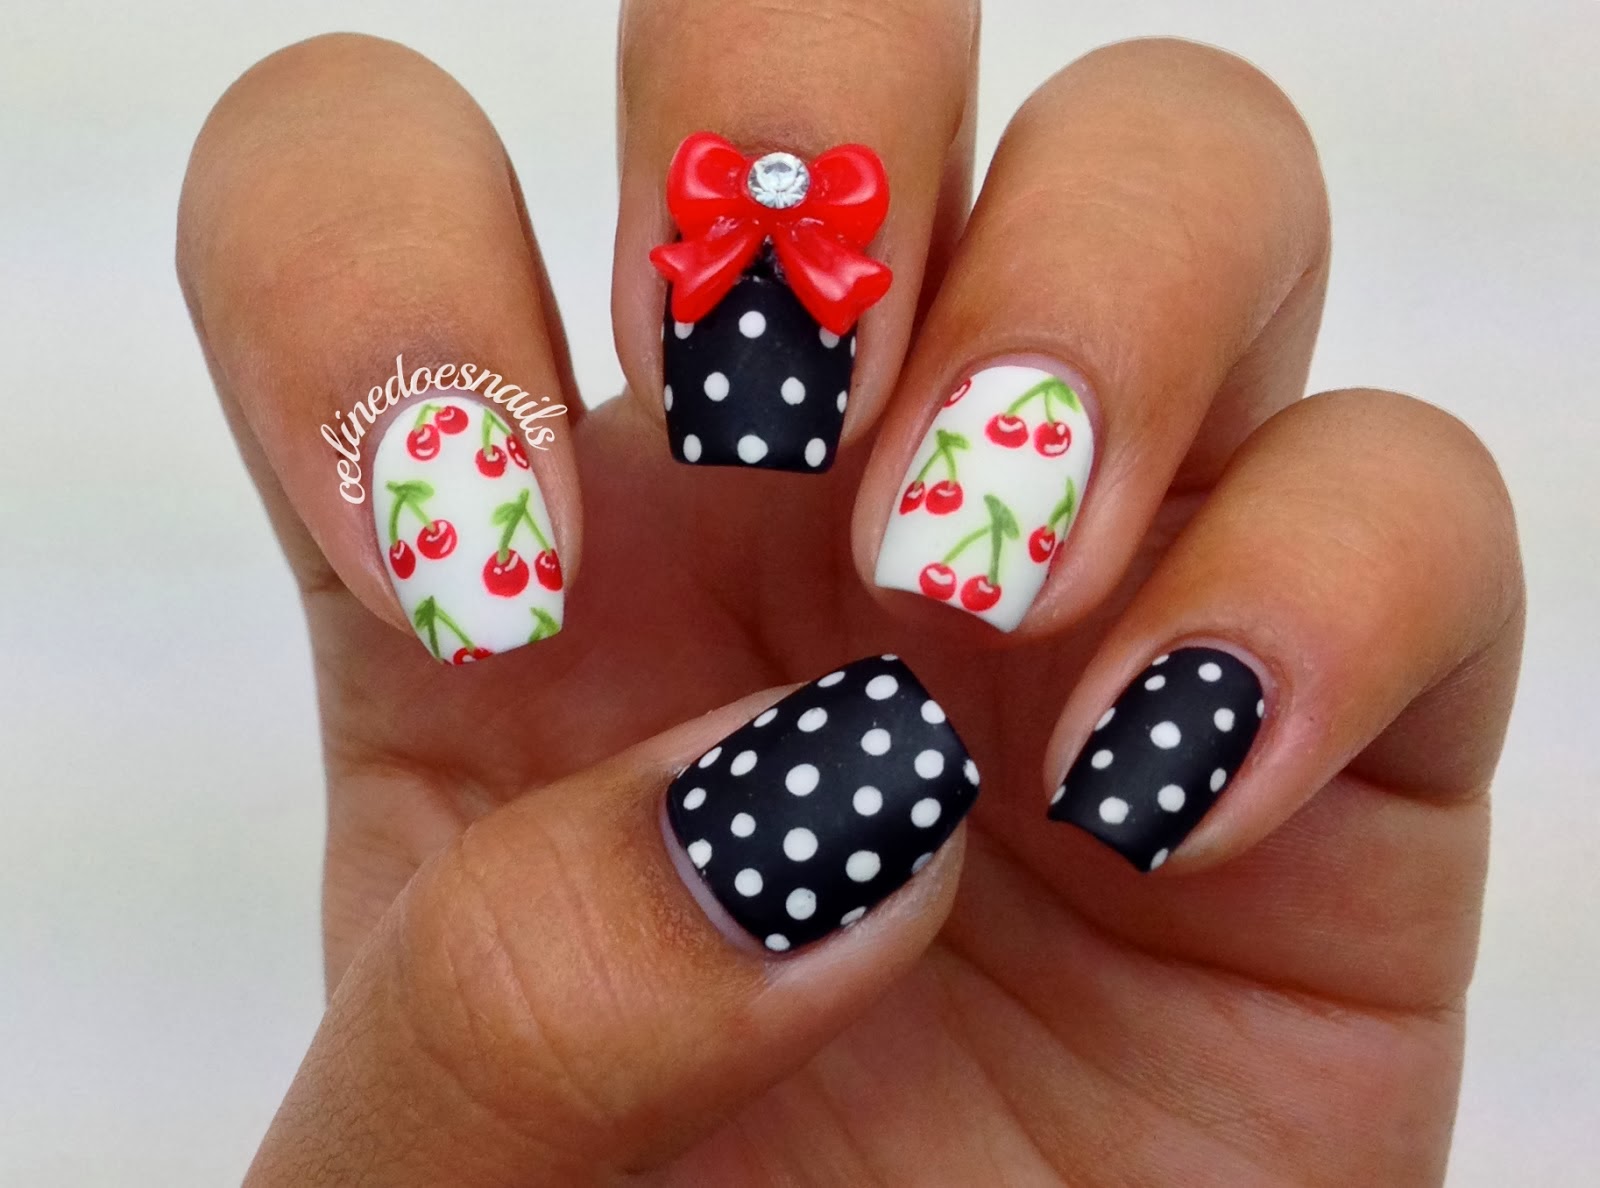 10. November Nail Designs with Leaves - wide 5